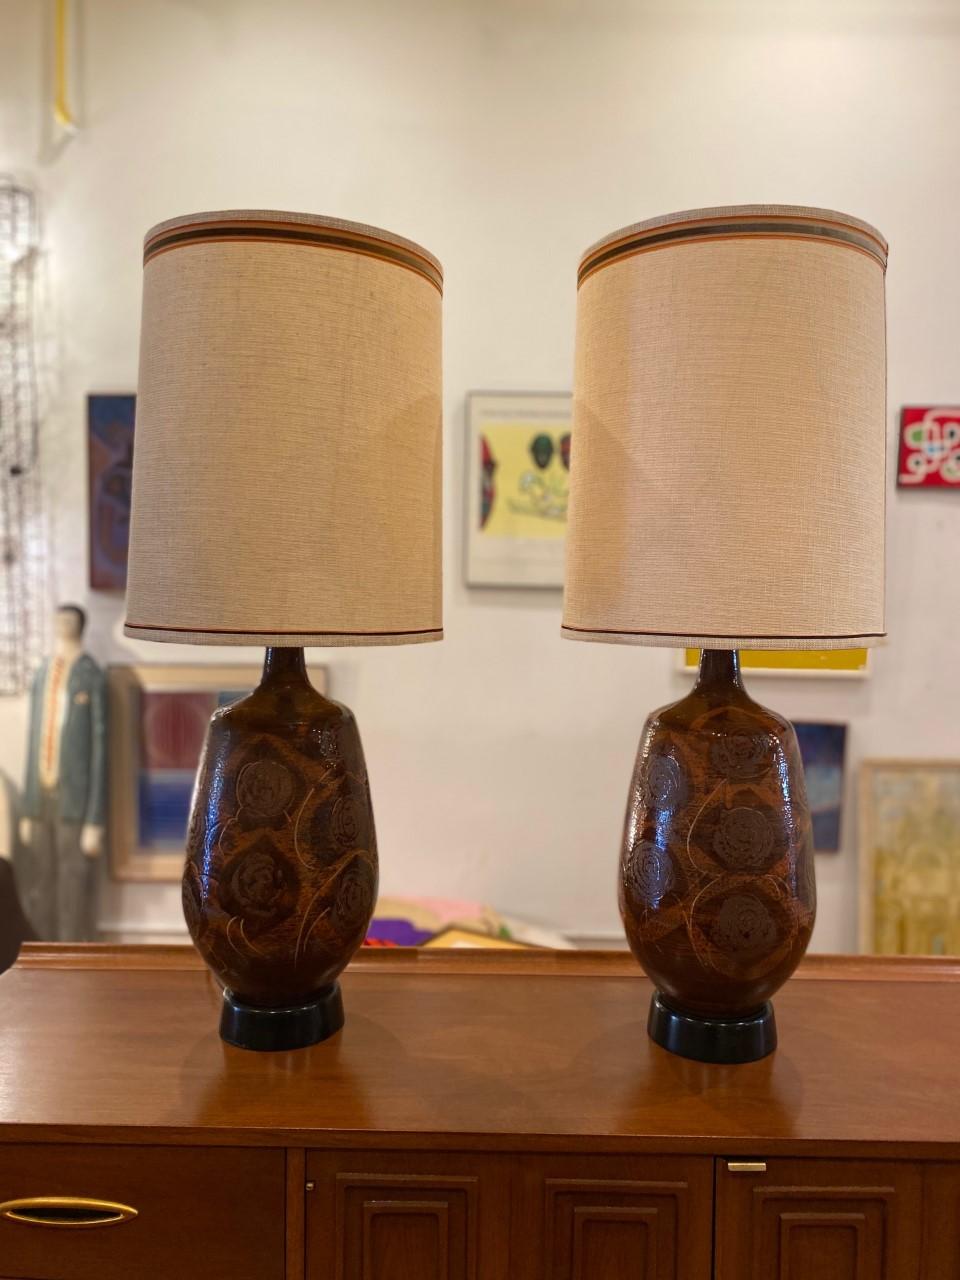 Beautiful pair of midcentury ceramic drip glazed table lamps. The pair includes lamp shades and together bring that MCM feel to your decor. Both lamps present a beautiful glazed design that permeates with hues of dark reddish hues in variant shades